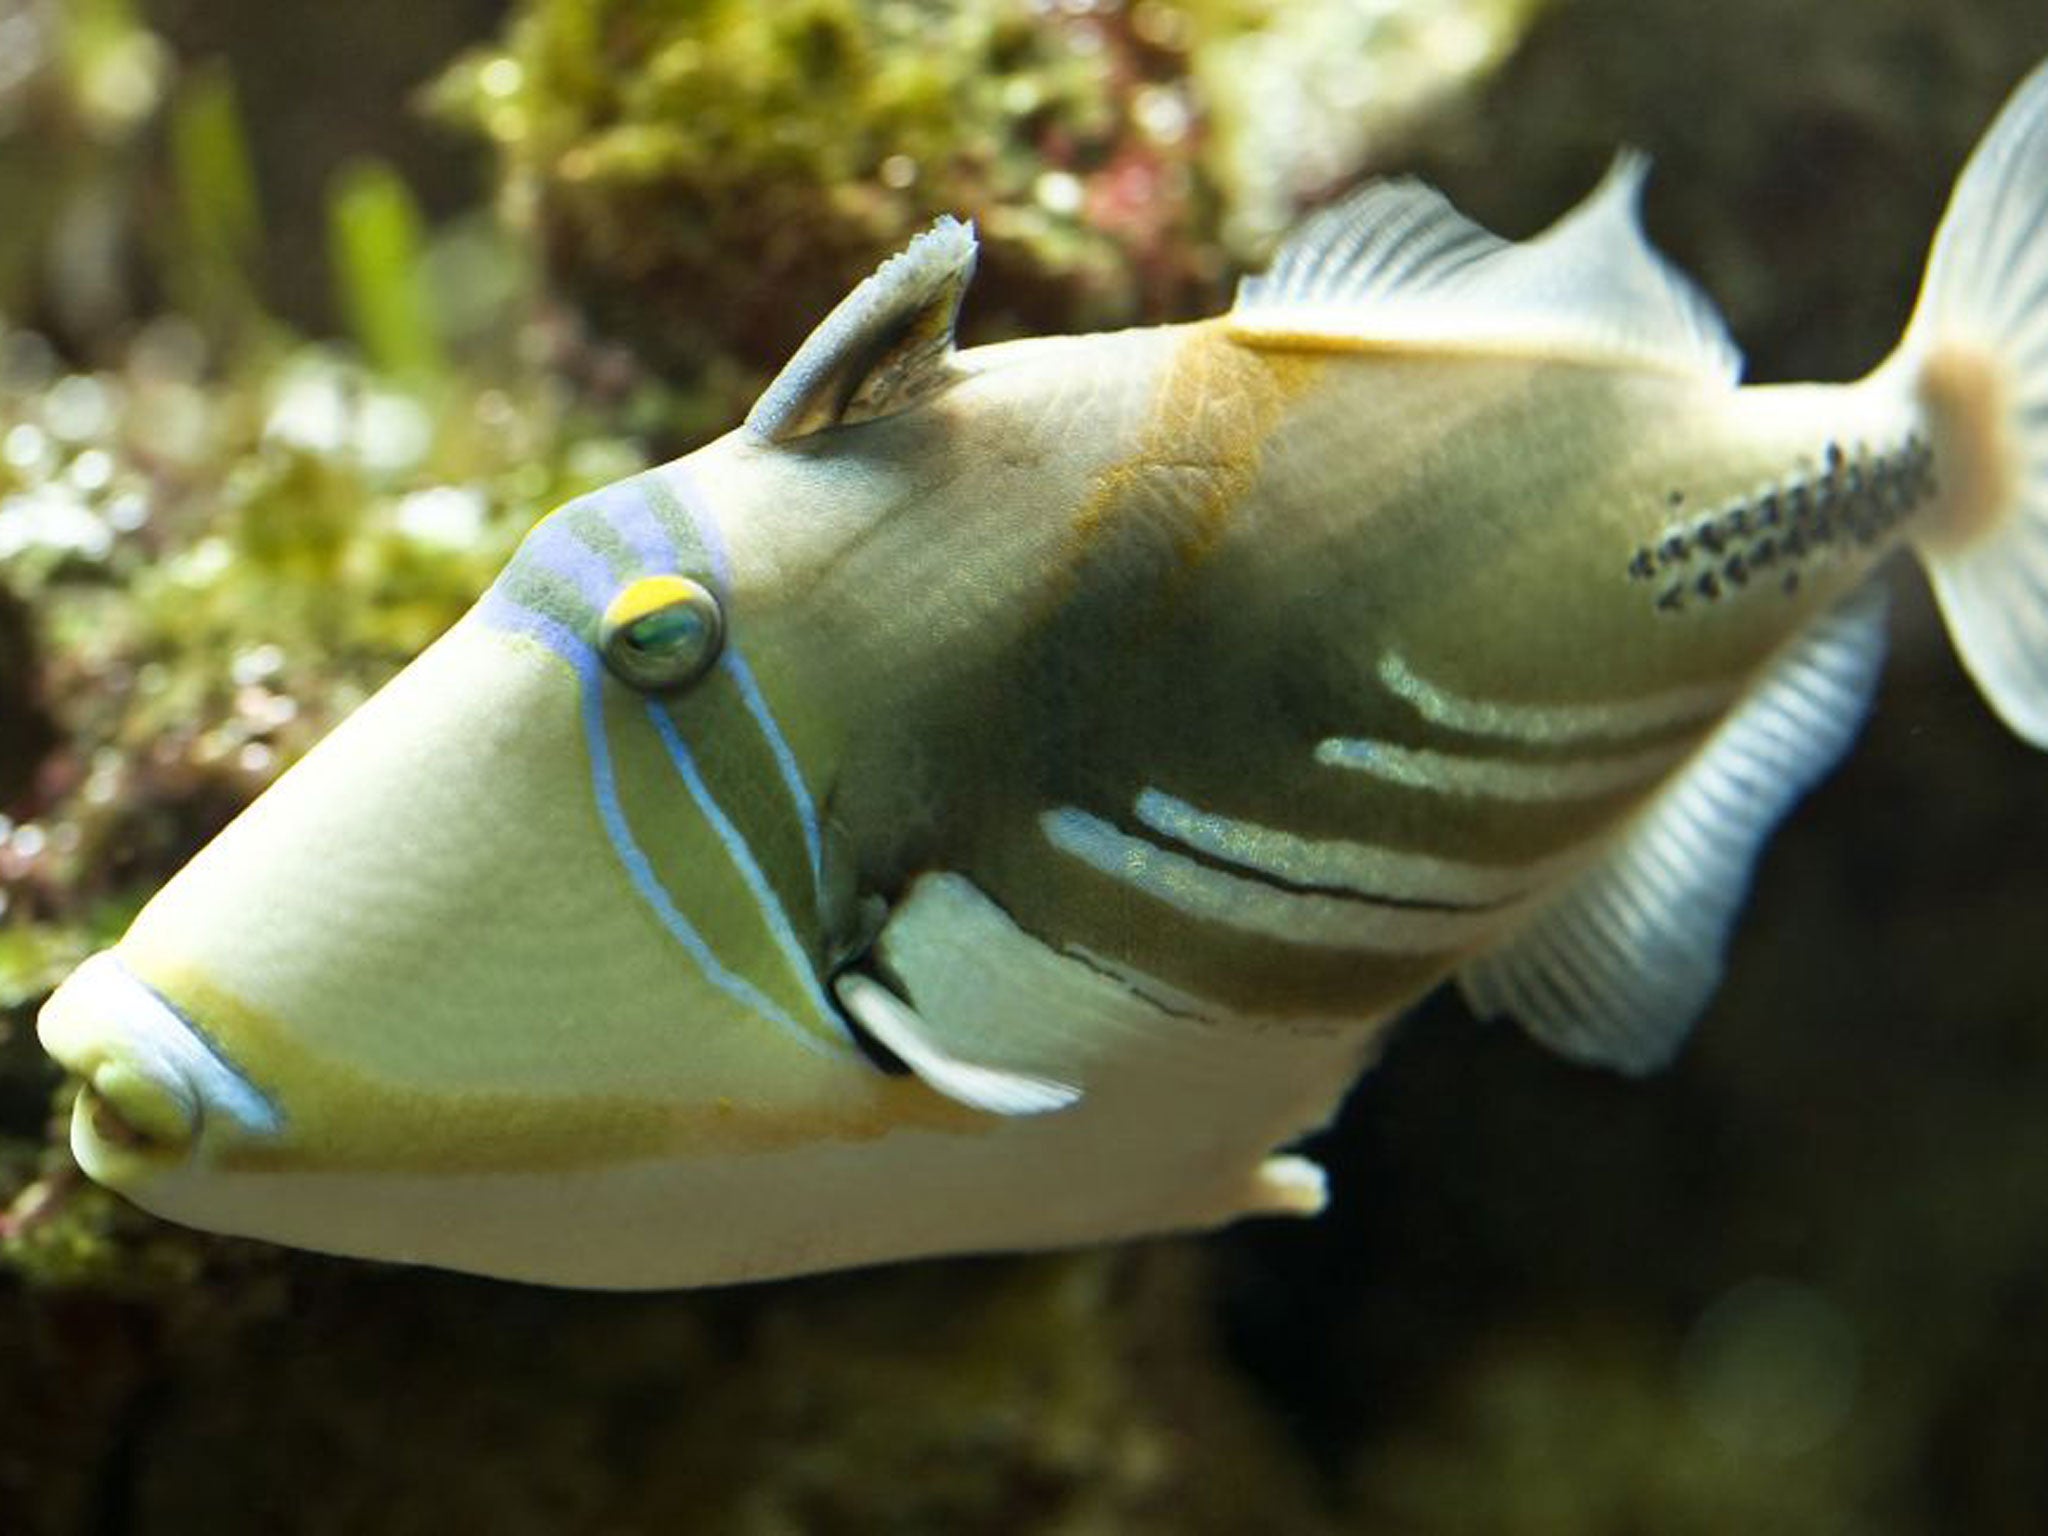 Triggerfish: The warming sea around North Wales is appealing to this non-native species